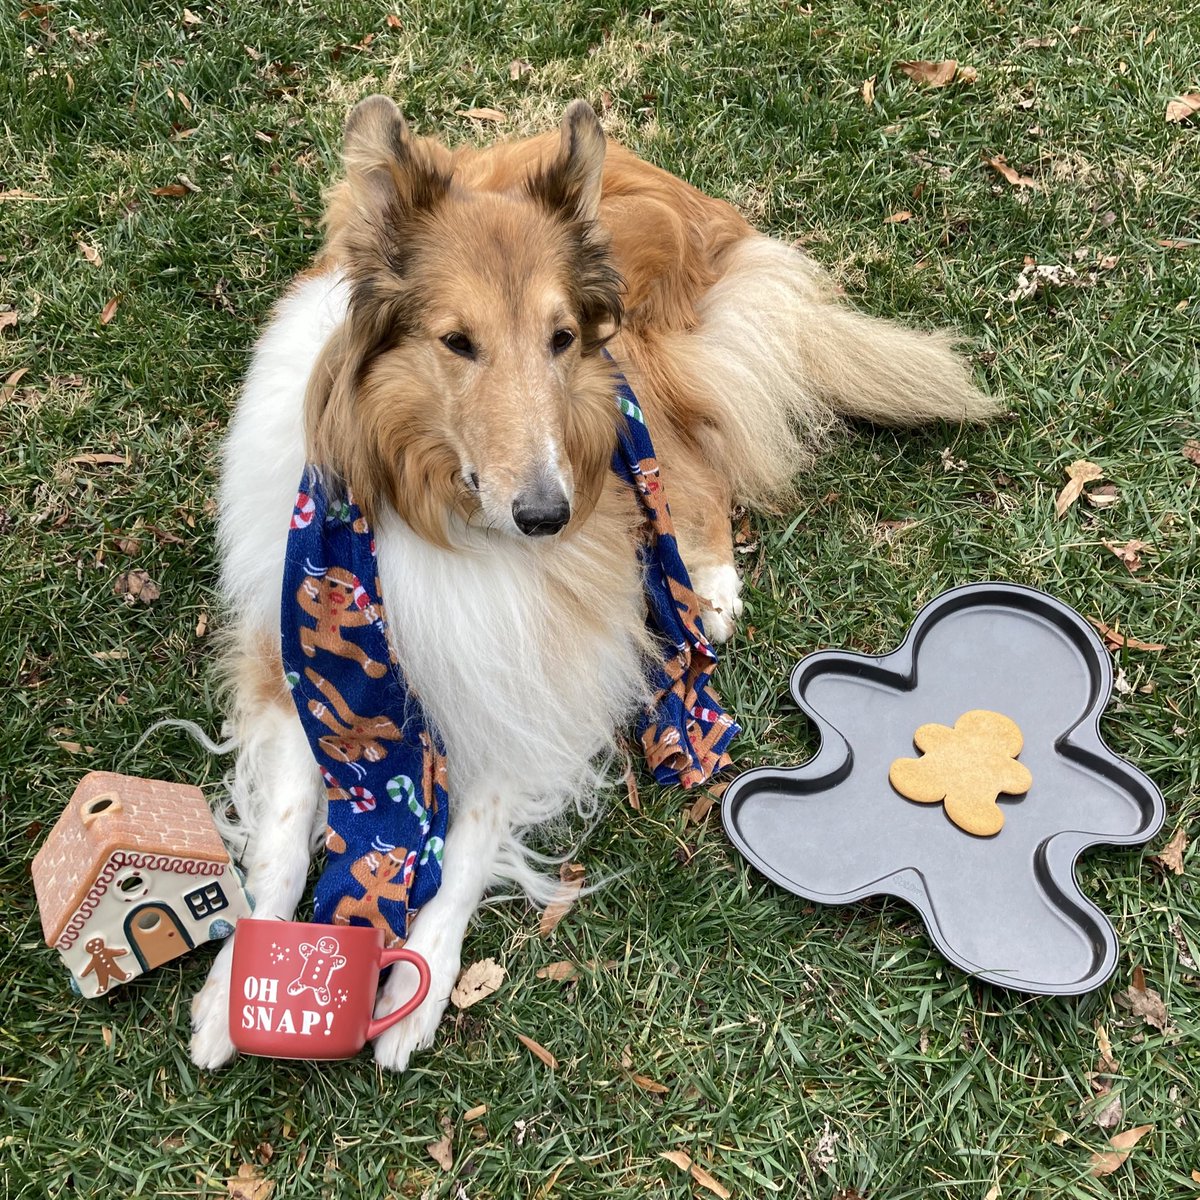 Oh snap! 👩‍🍳 I think mommy over baked the #gingerbreadman and he shrunk.  

#HoneyIshrunkTheKids #ohsnap #gingerbreadcookies #christmascountdown #roughcollie